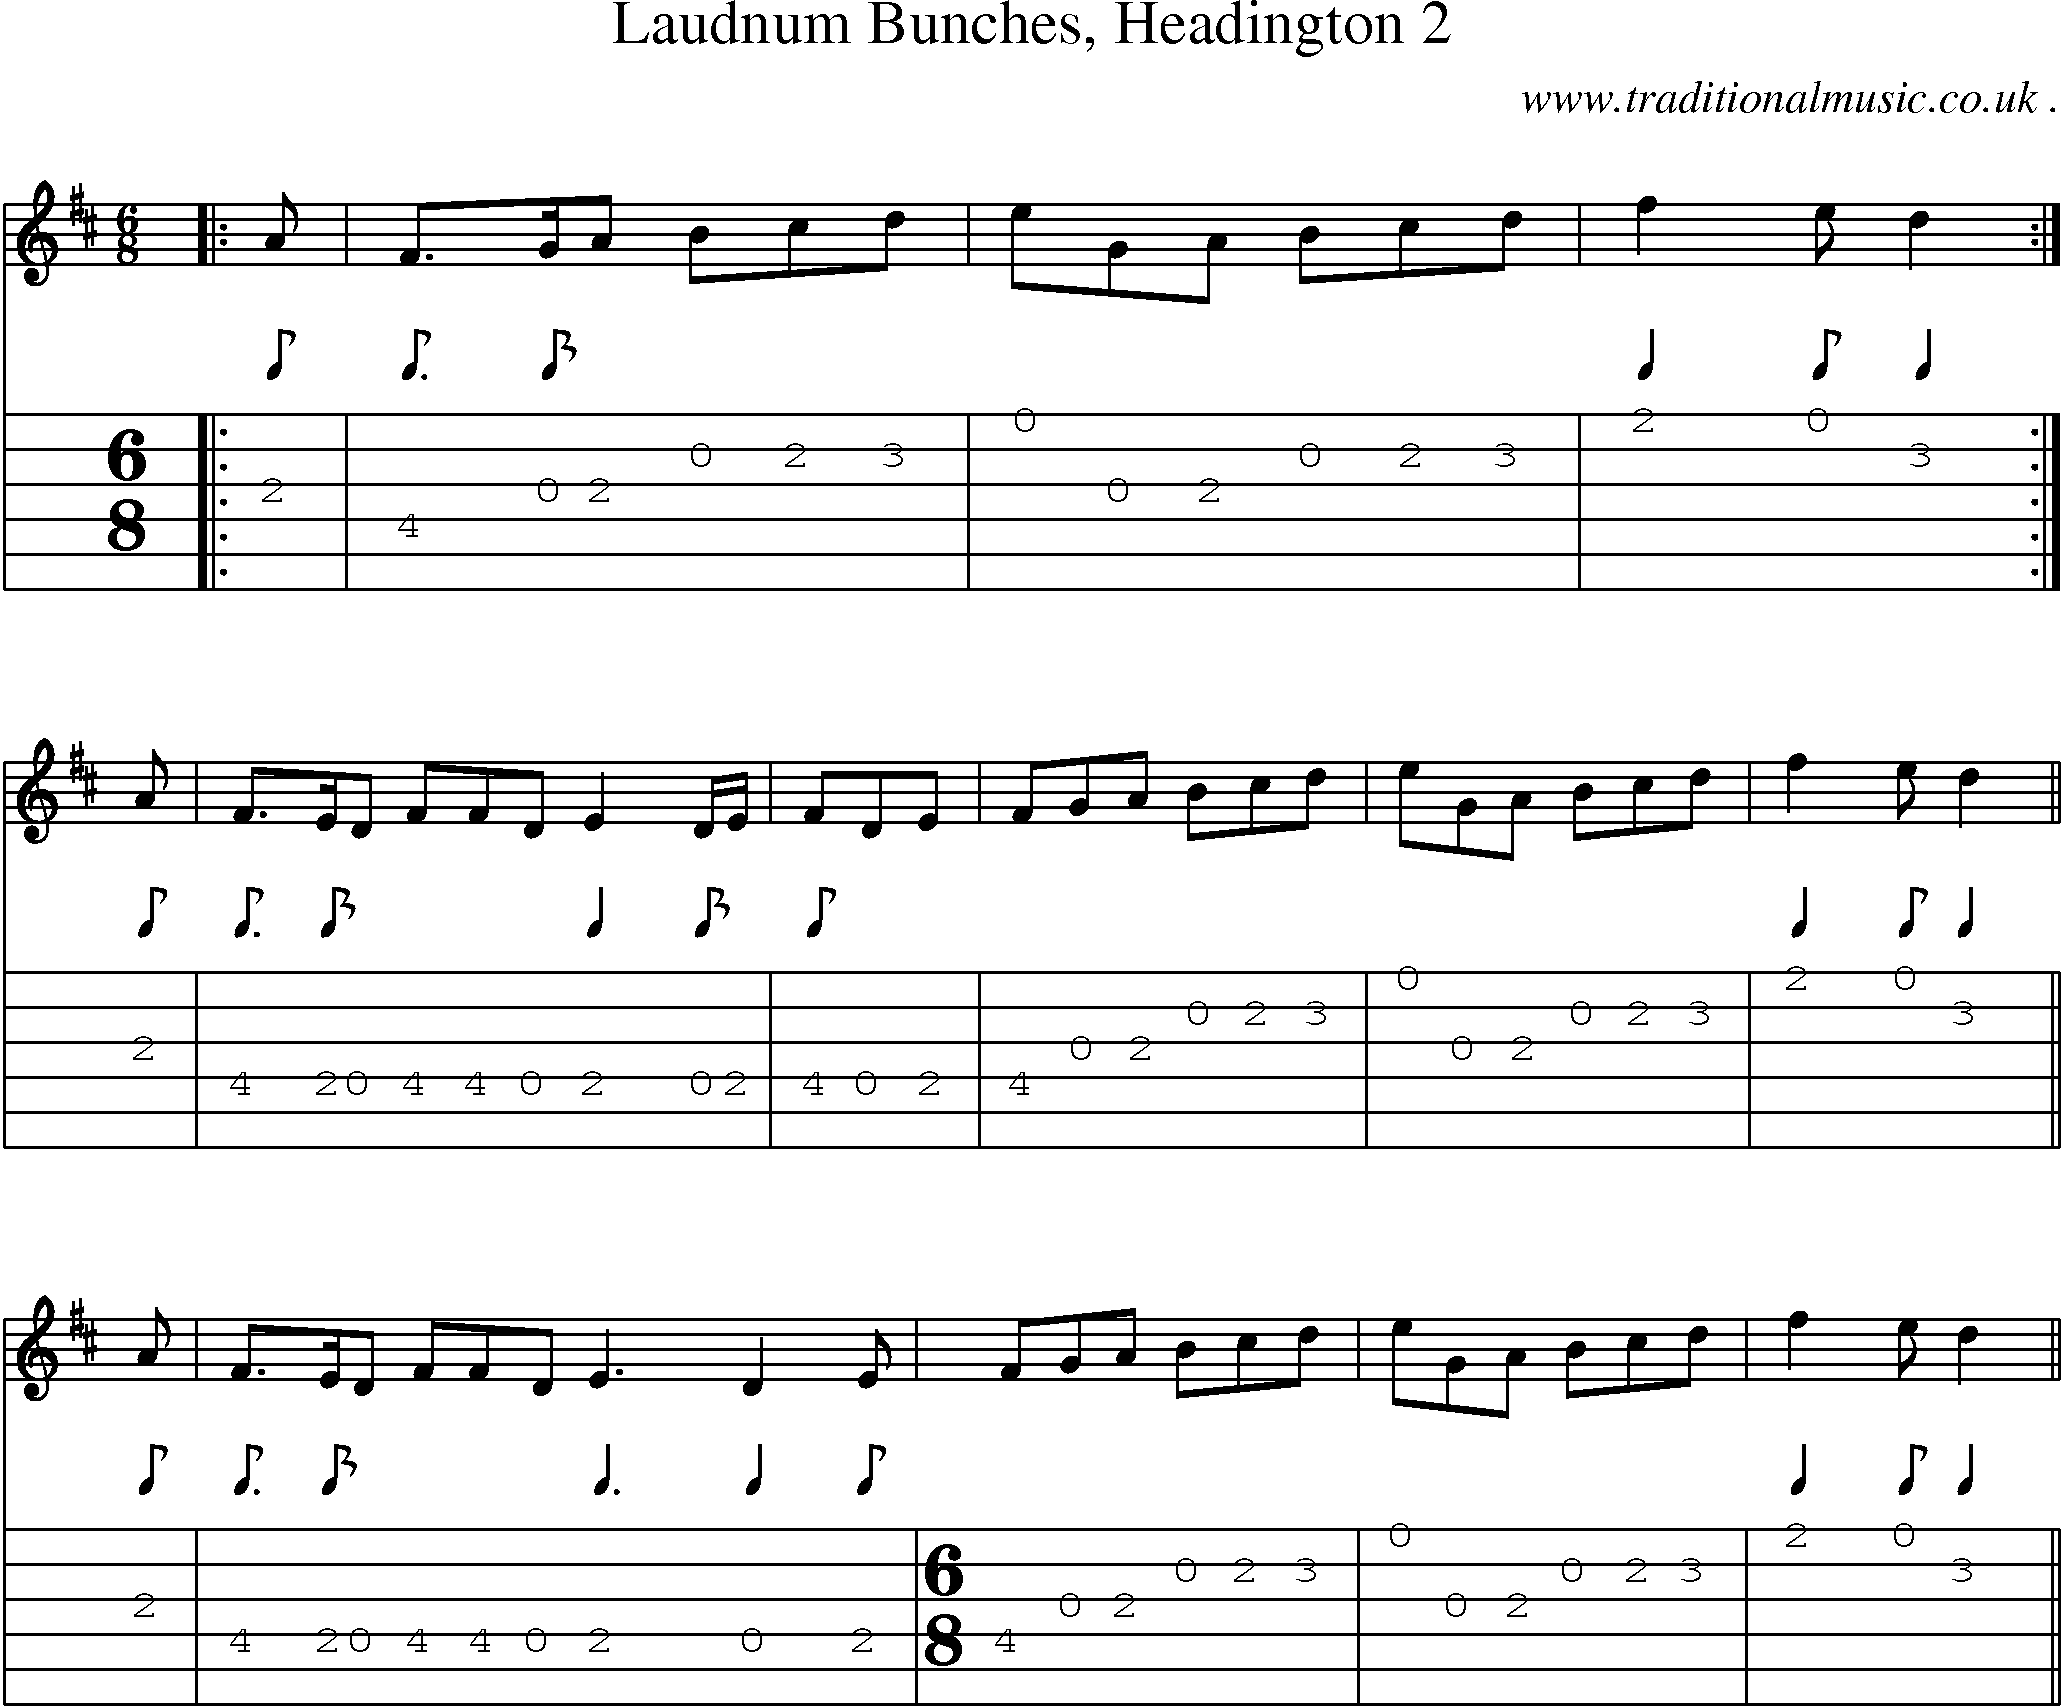 Sheet-Music and Guitar Tabs for Laudnum Bunches Headington 2